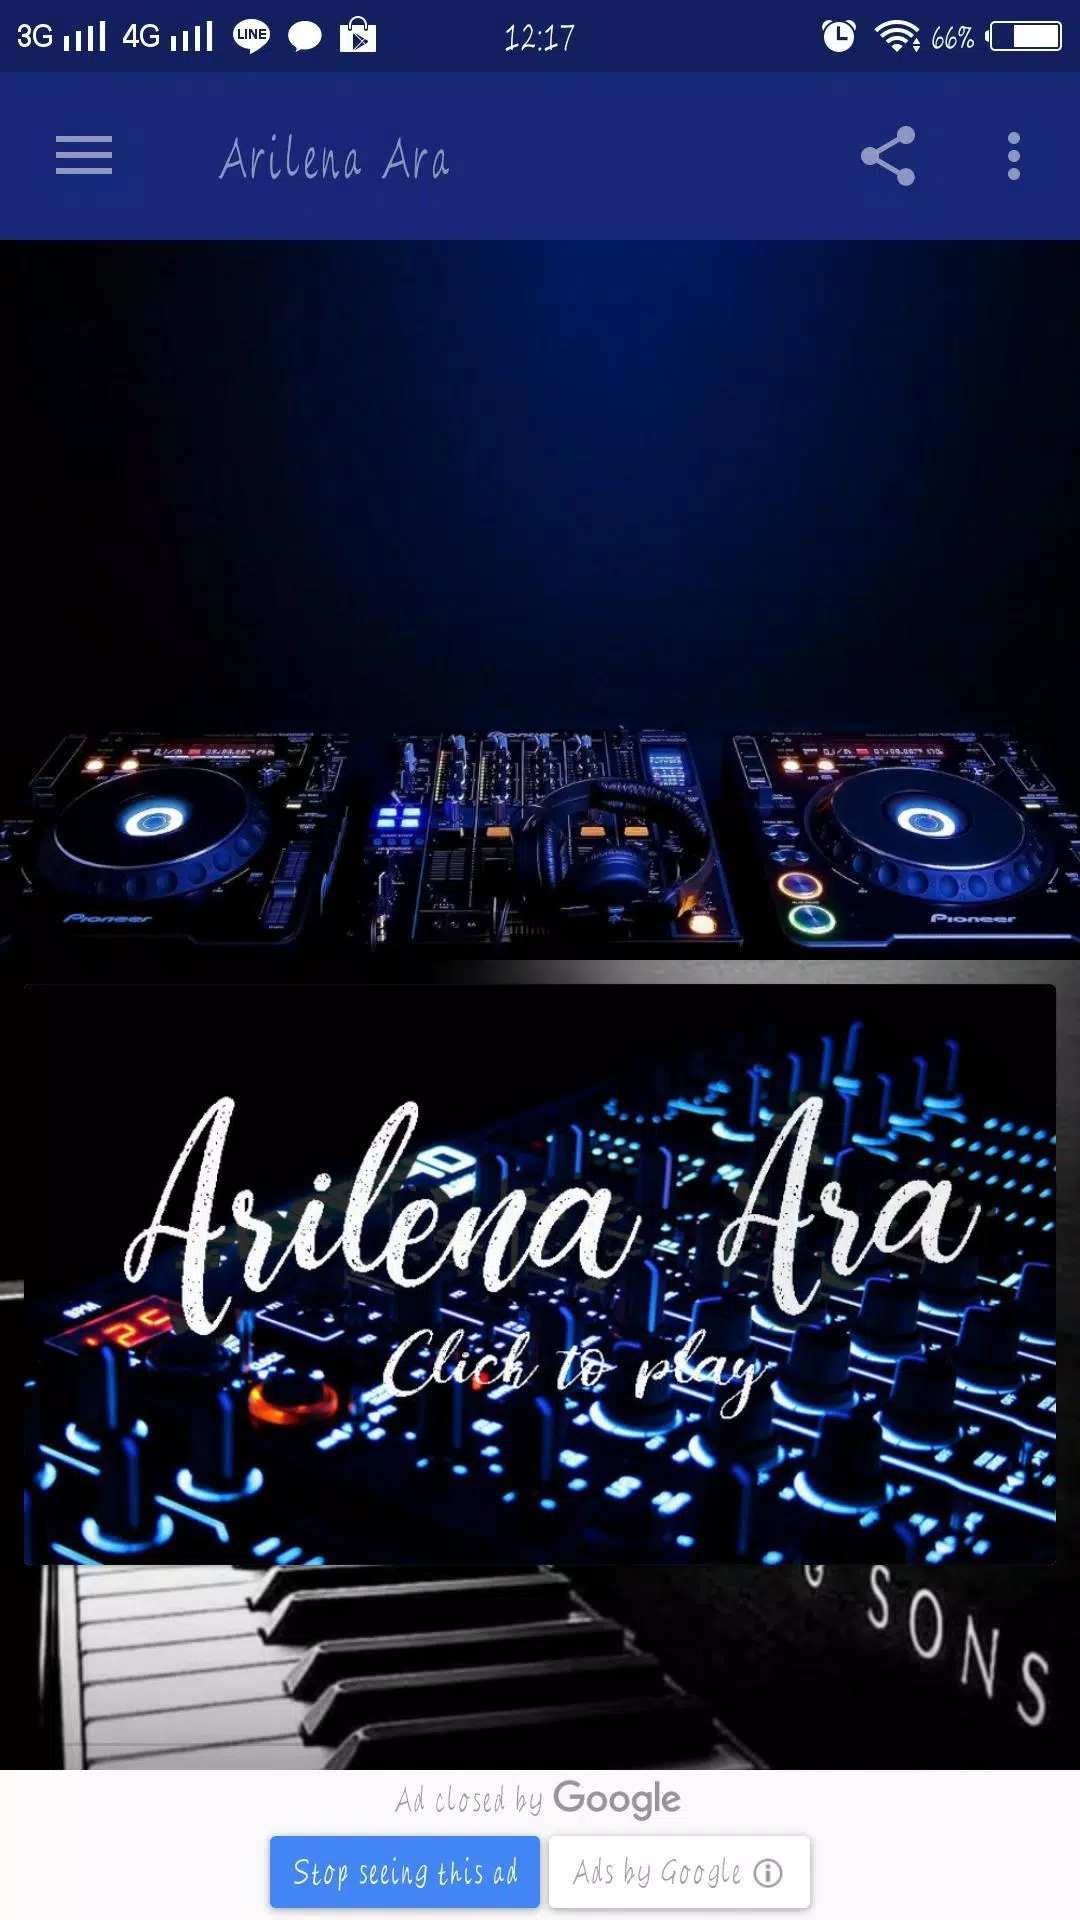 New Song Arilena Ara Full Remix for Android - APK Download